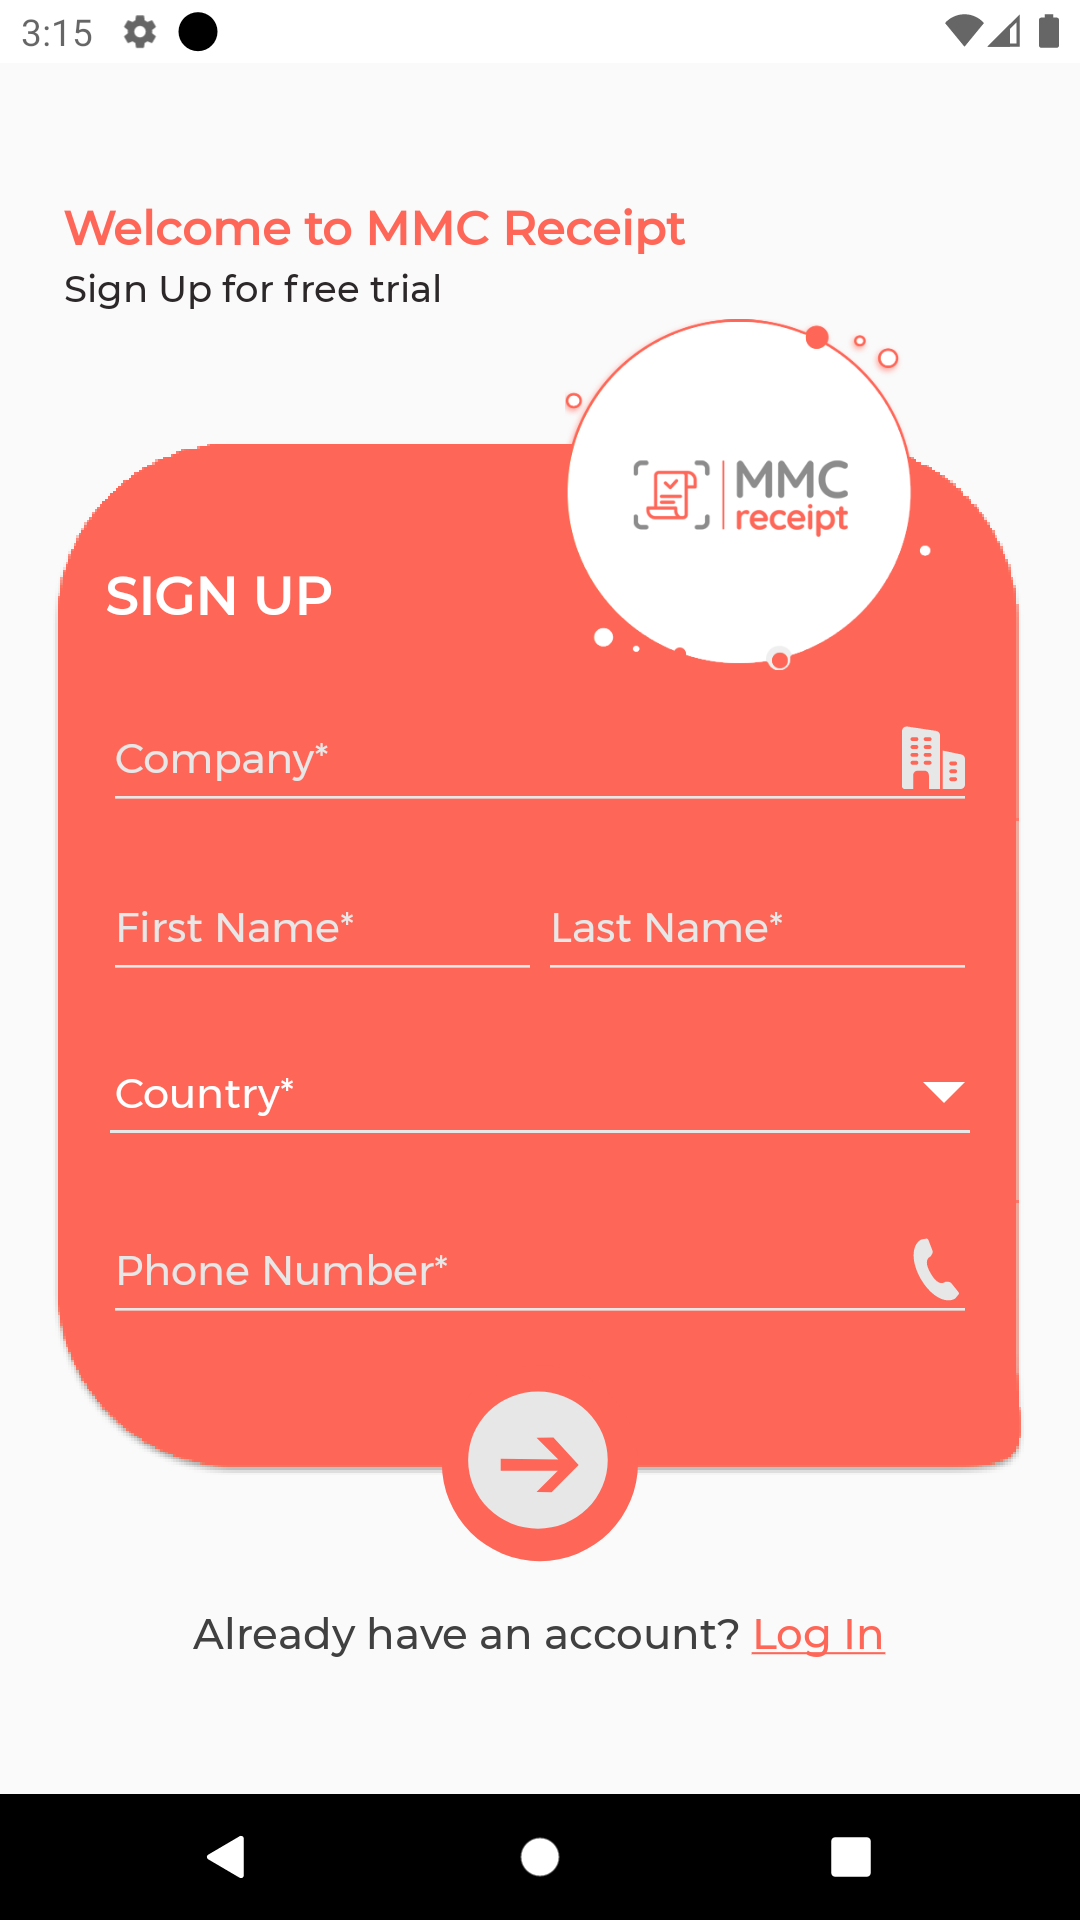 MMC Receipt - Signup page 1